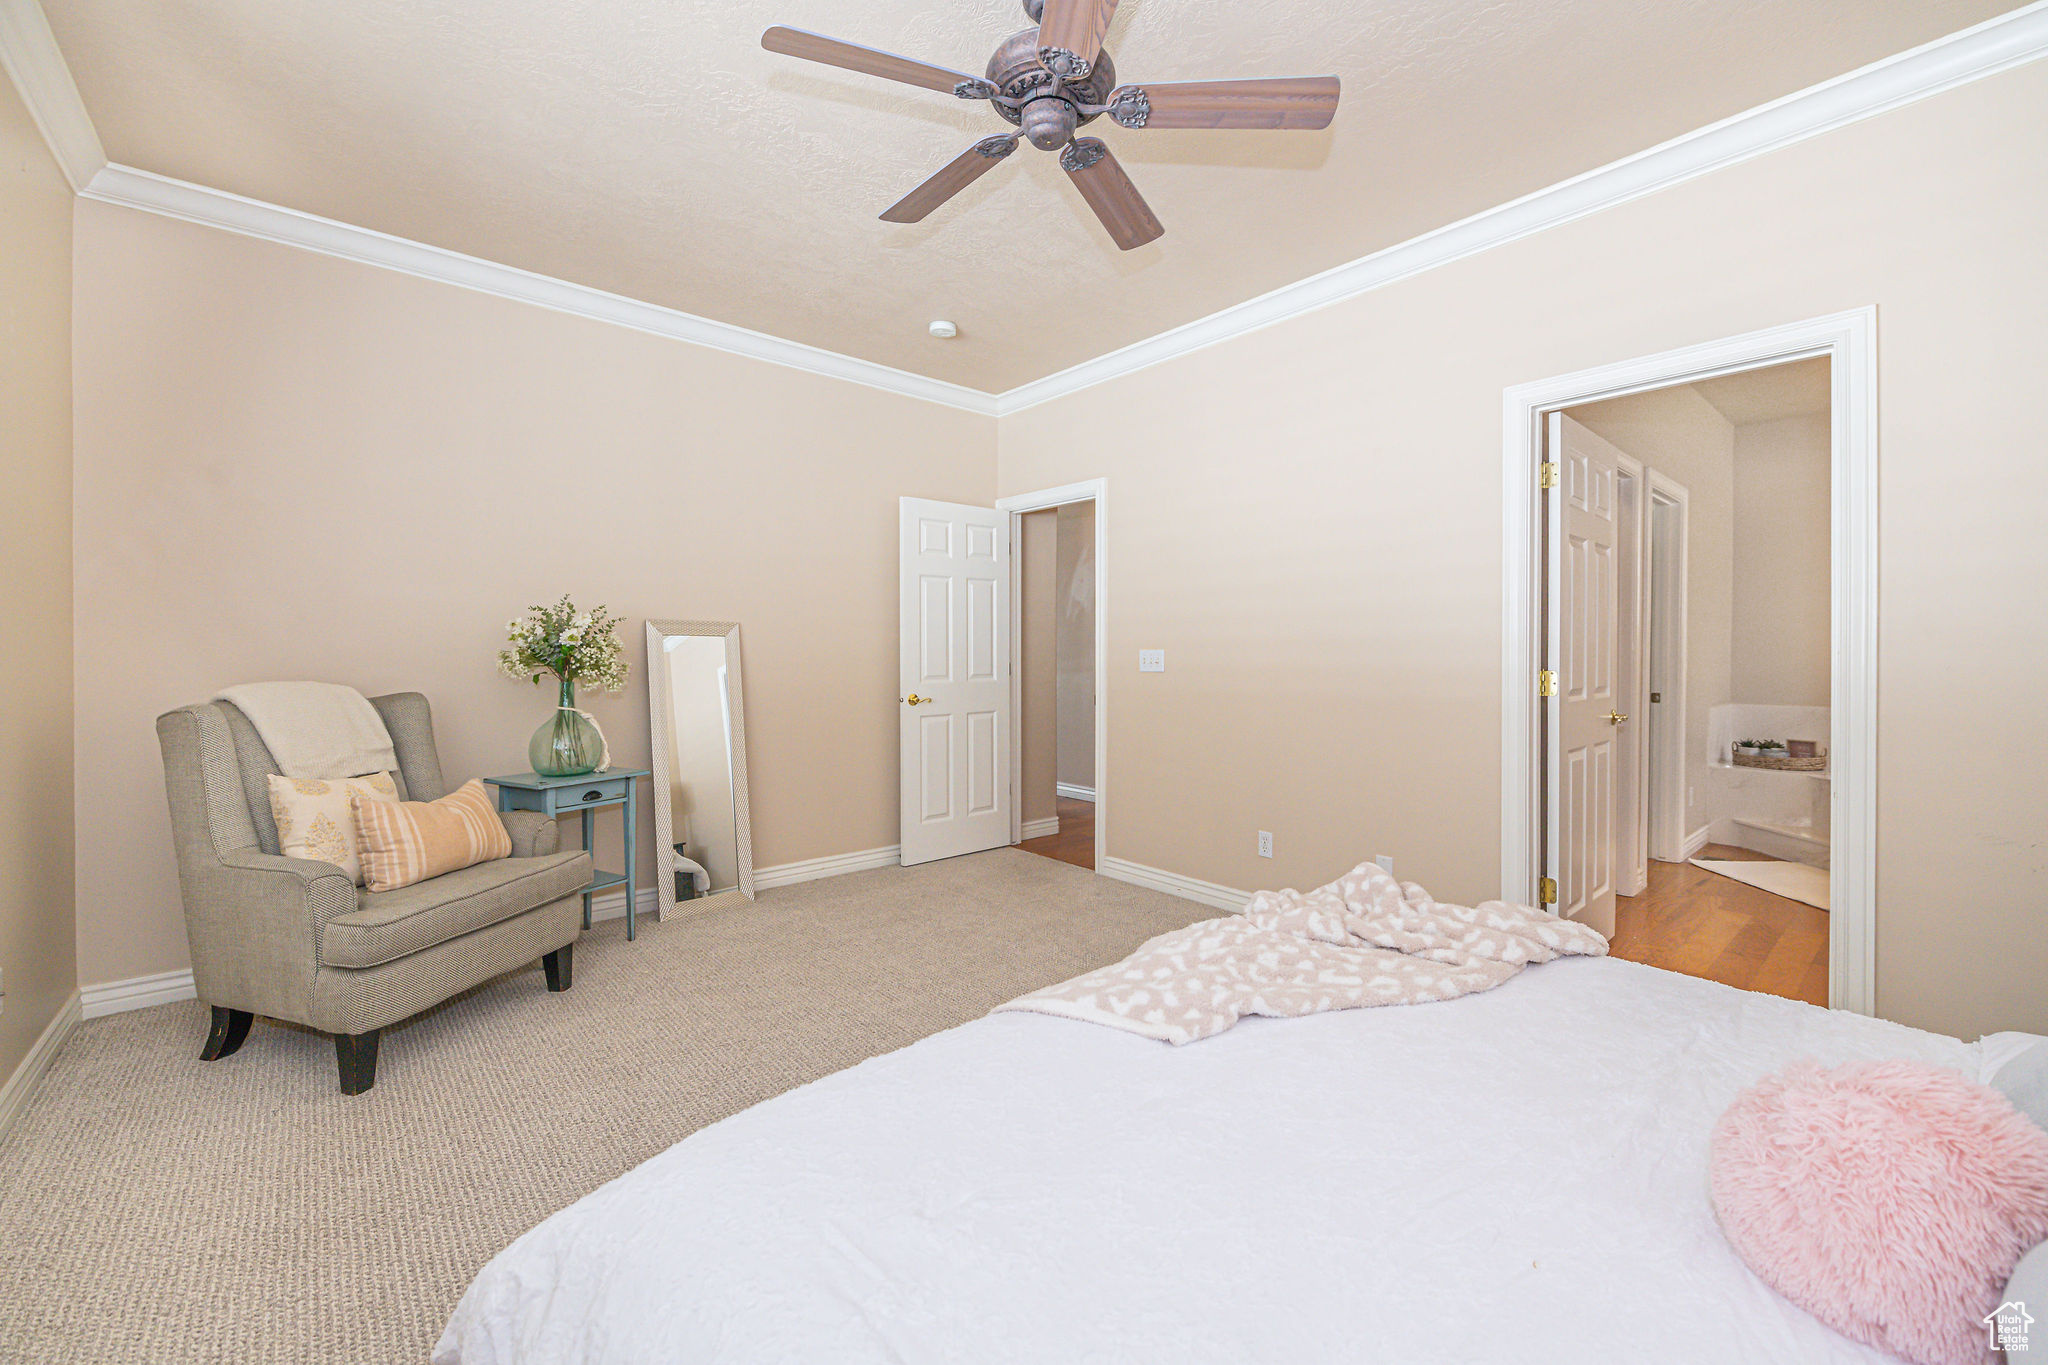 Bedroom featuring crown molding, light colored carpet, ceiling fan, and connected bathroom